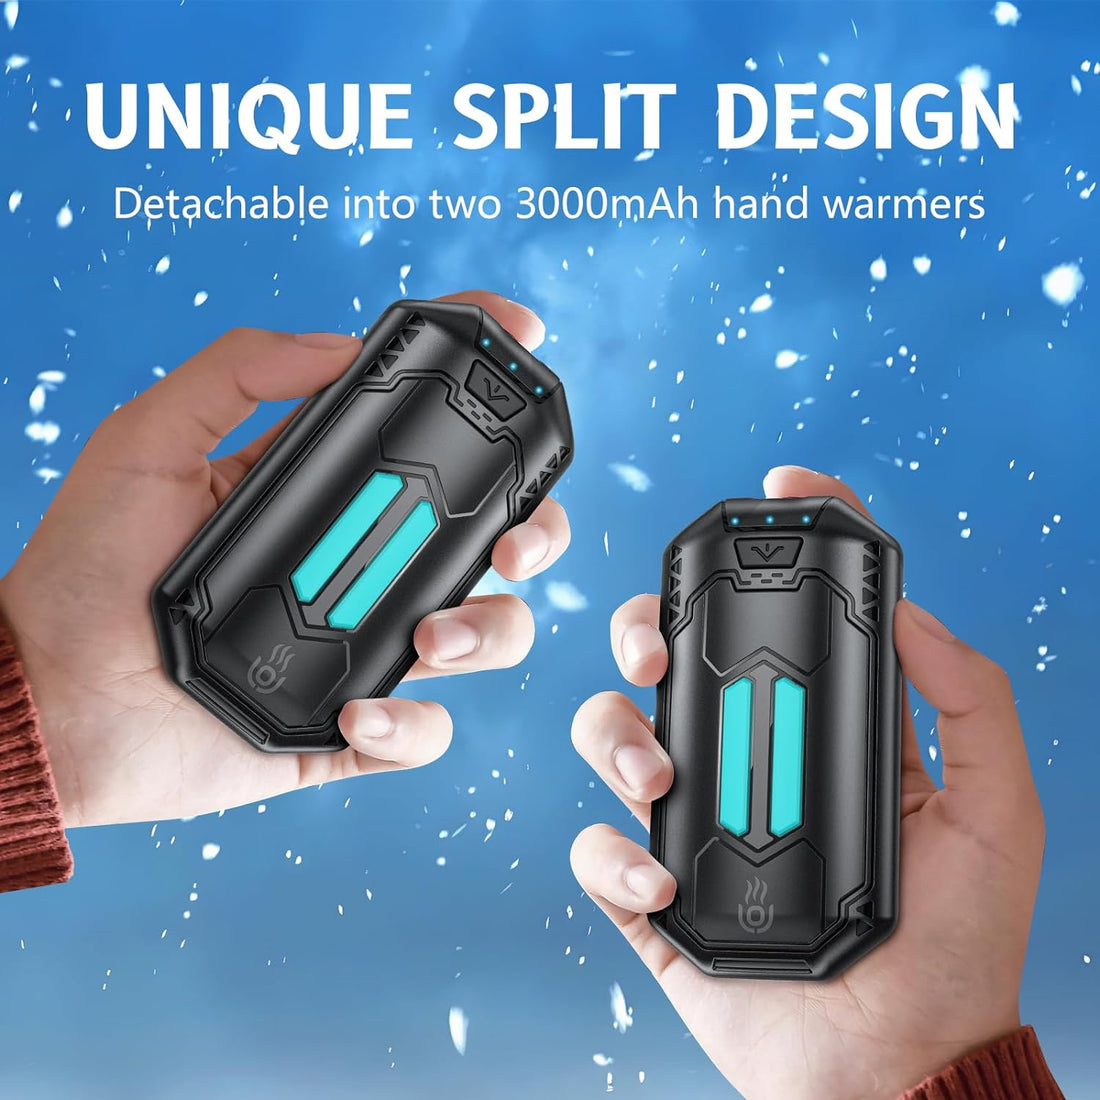 Hand Warmers Rechargeable OUTJUT 2 in 1 USB Pocket-Sized Handwarmers Easy to Carry 20h Electric Hand Warmer 3 Heat Settings Hot Hand Gifts for Men Women Go Out for Hiking Camping Sking and Fishing